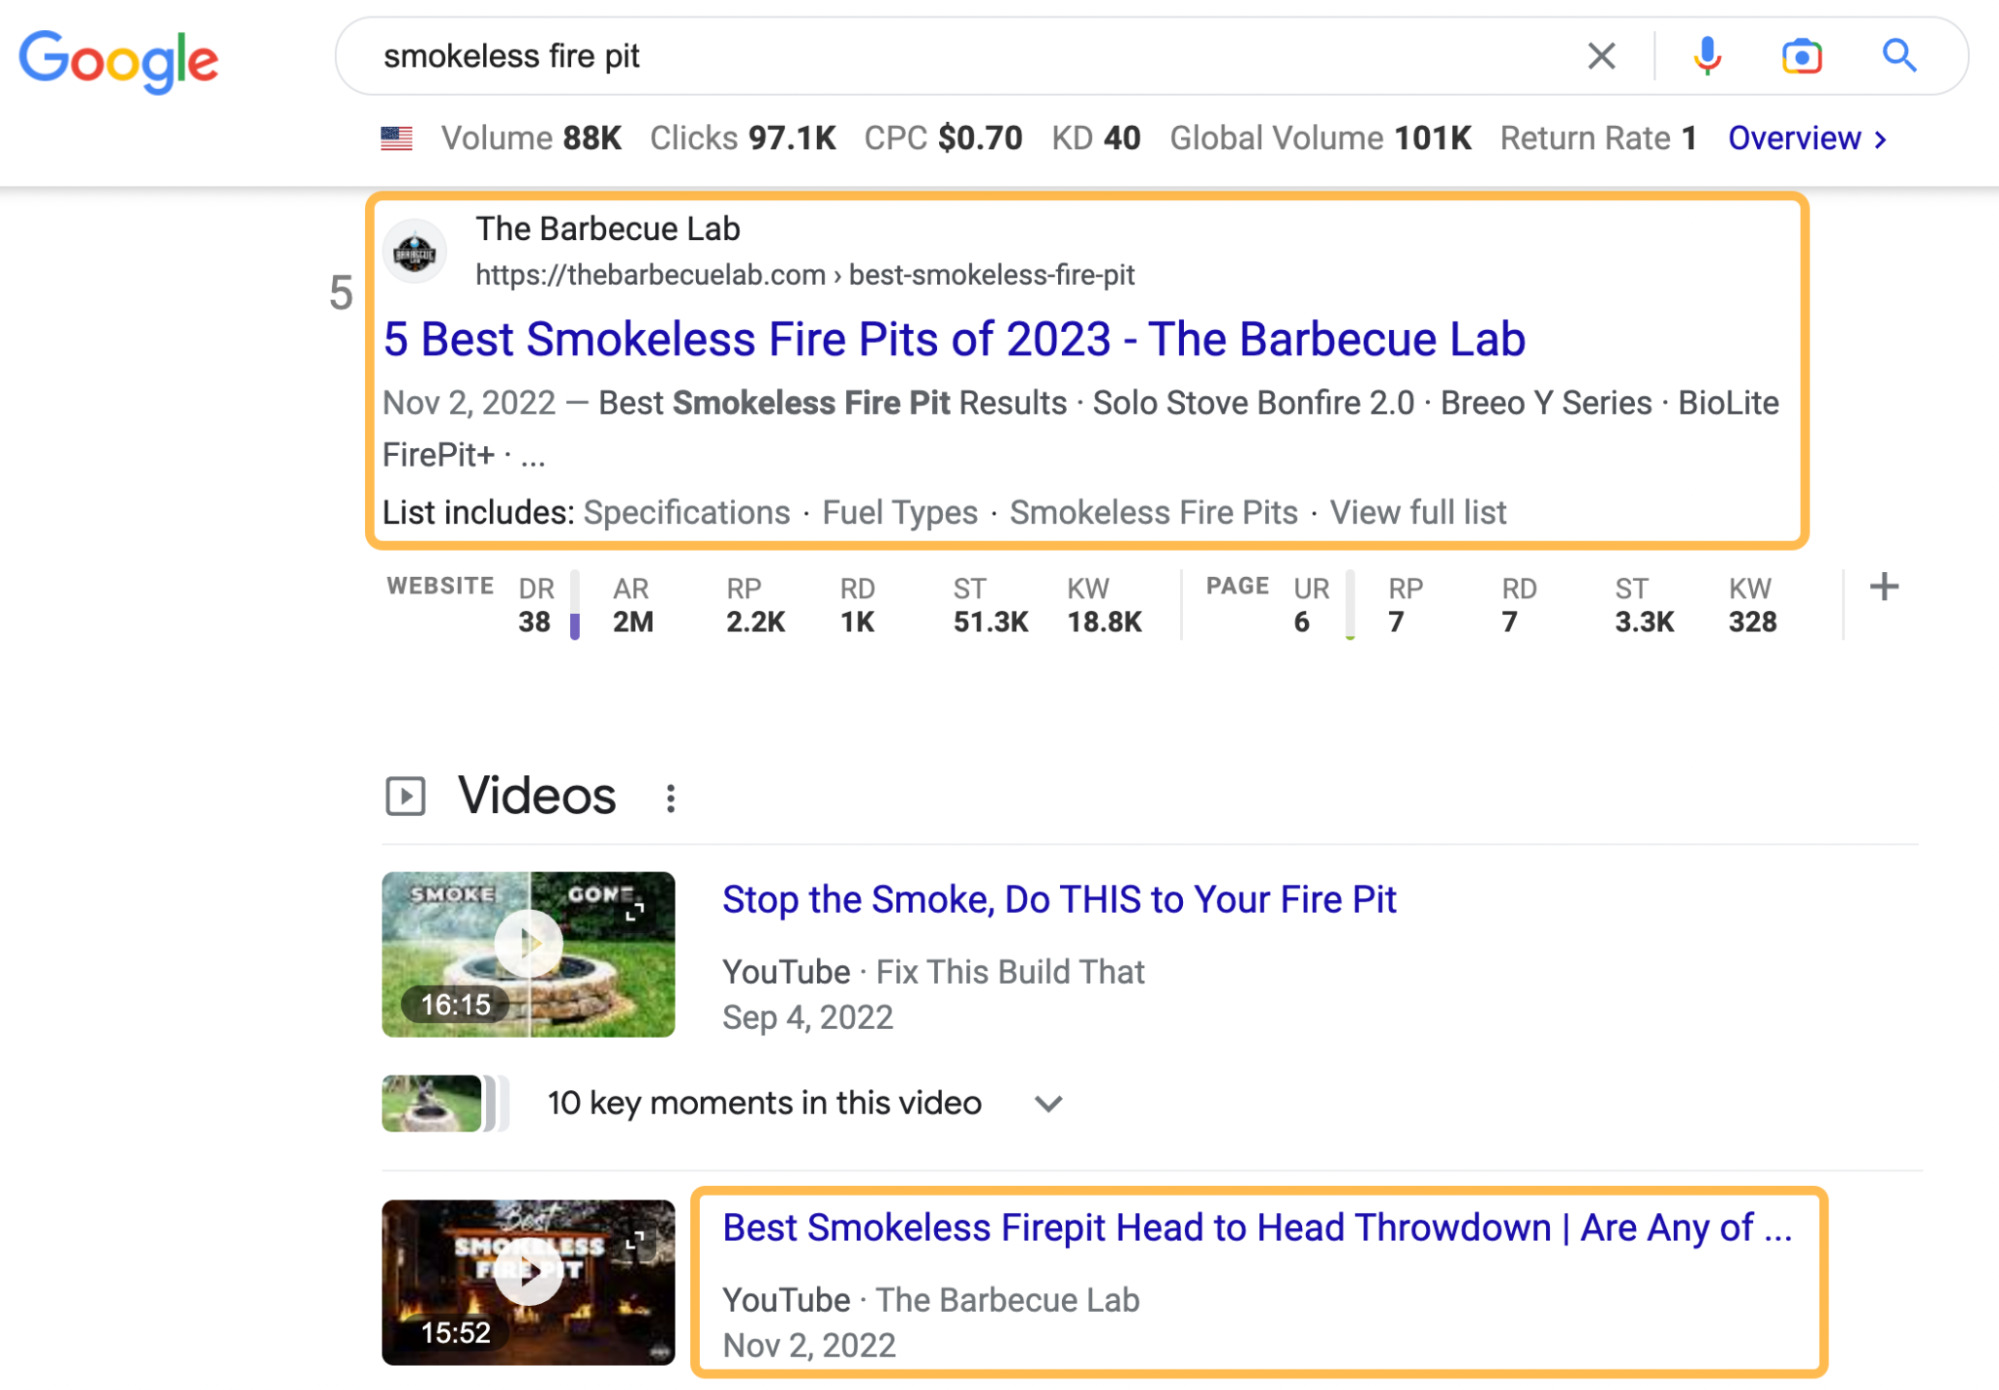 The Barbecue Lab captures two search results for the keyword "smokeless fire pit"